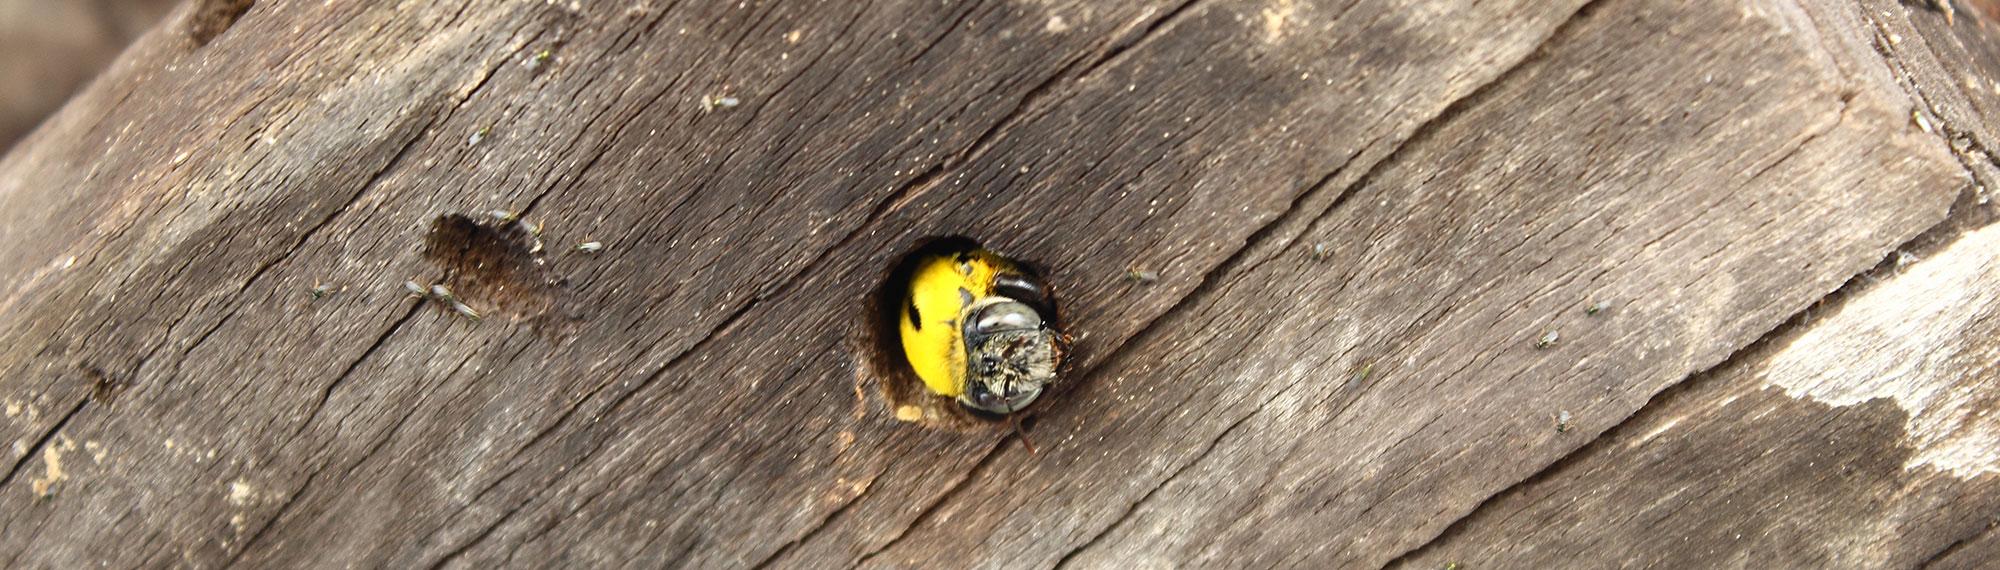 carpenter bee drilling a hole in wood